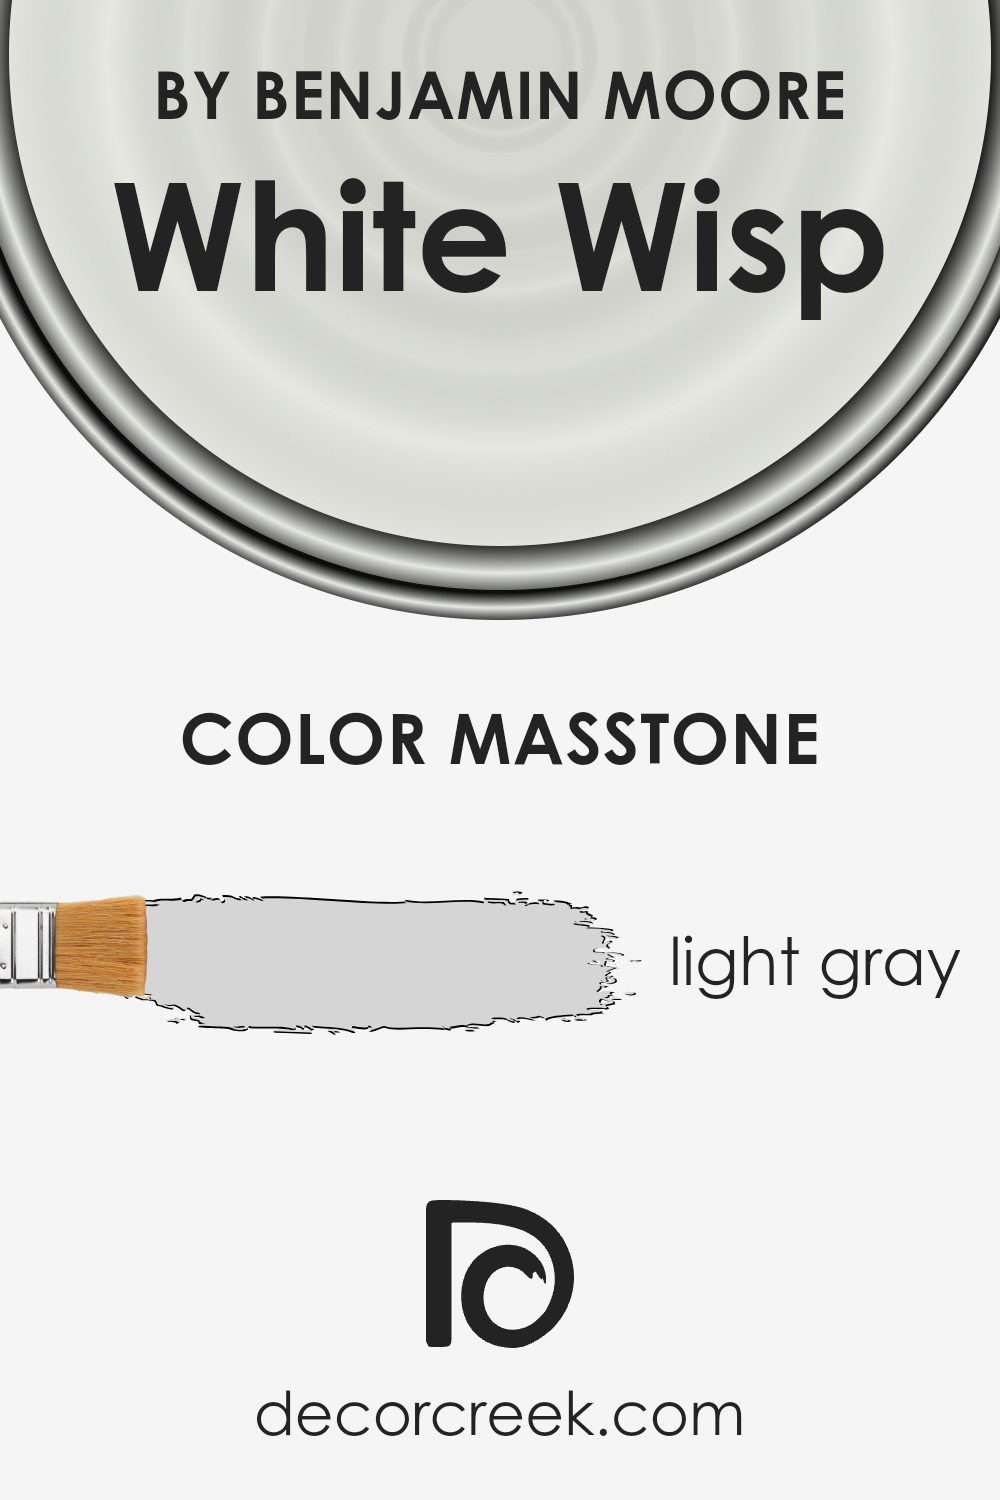 what_is_the_masstone_of_white_wisp_oc_54